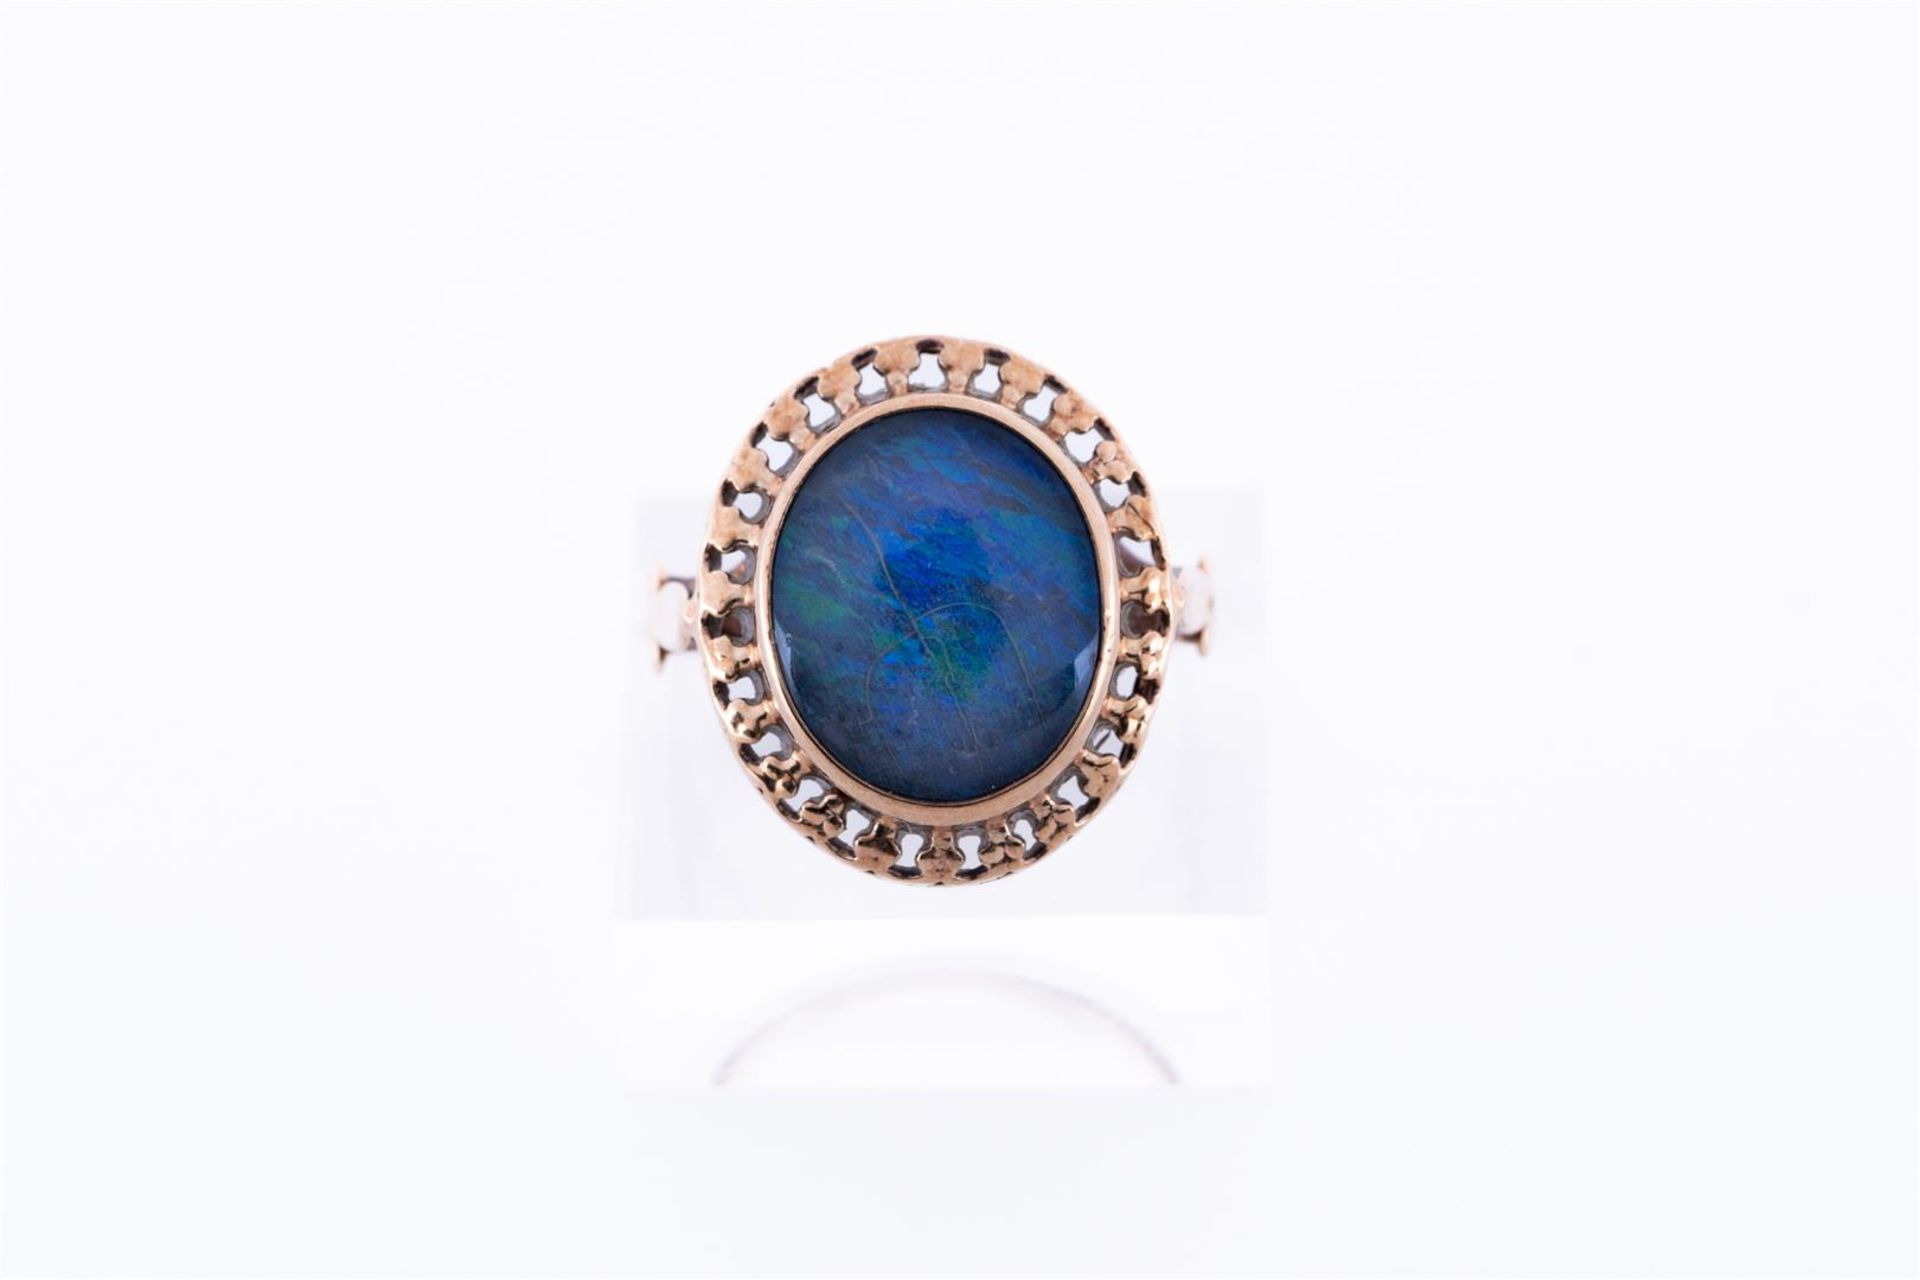 9kt Yellow gold openwork ring set with a cabochon cut oval triplet opal.
Stone dimensions: approx. 1 - Image 2 of 4